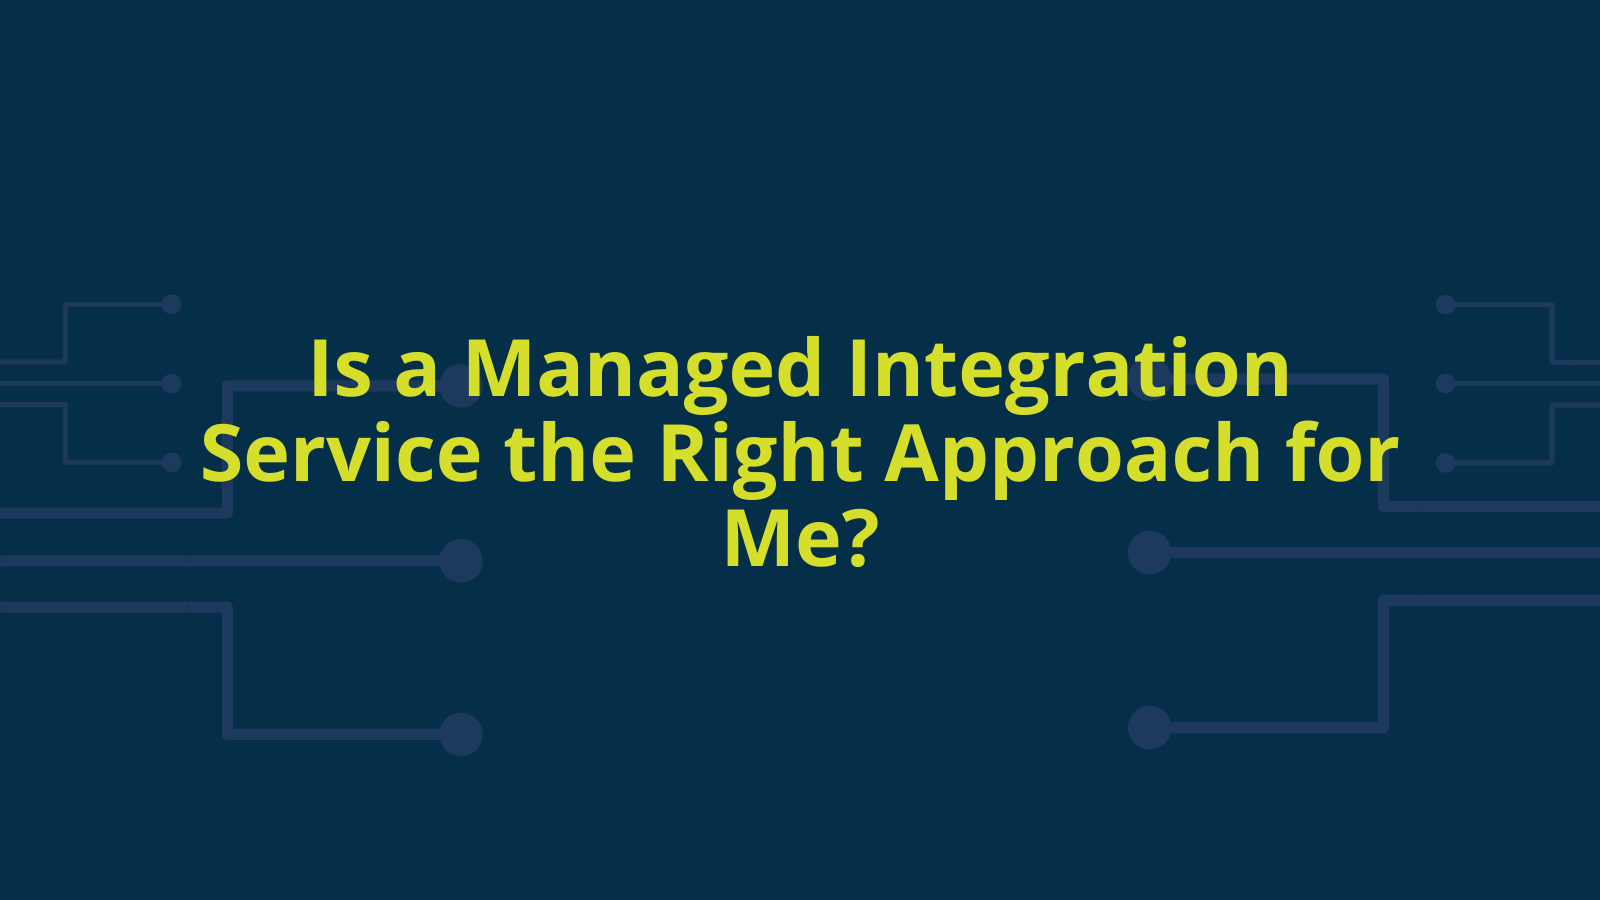 Is a Managed Integration Service (MSP) the Right Approach for Me